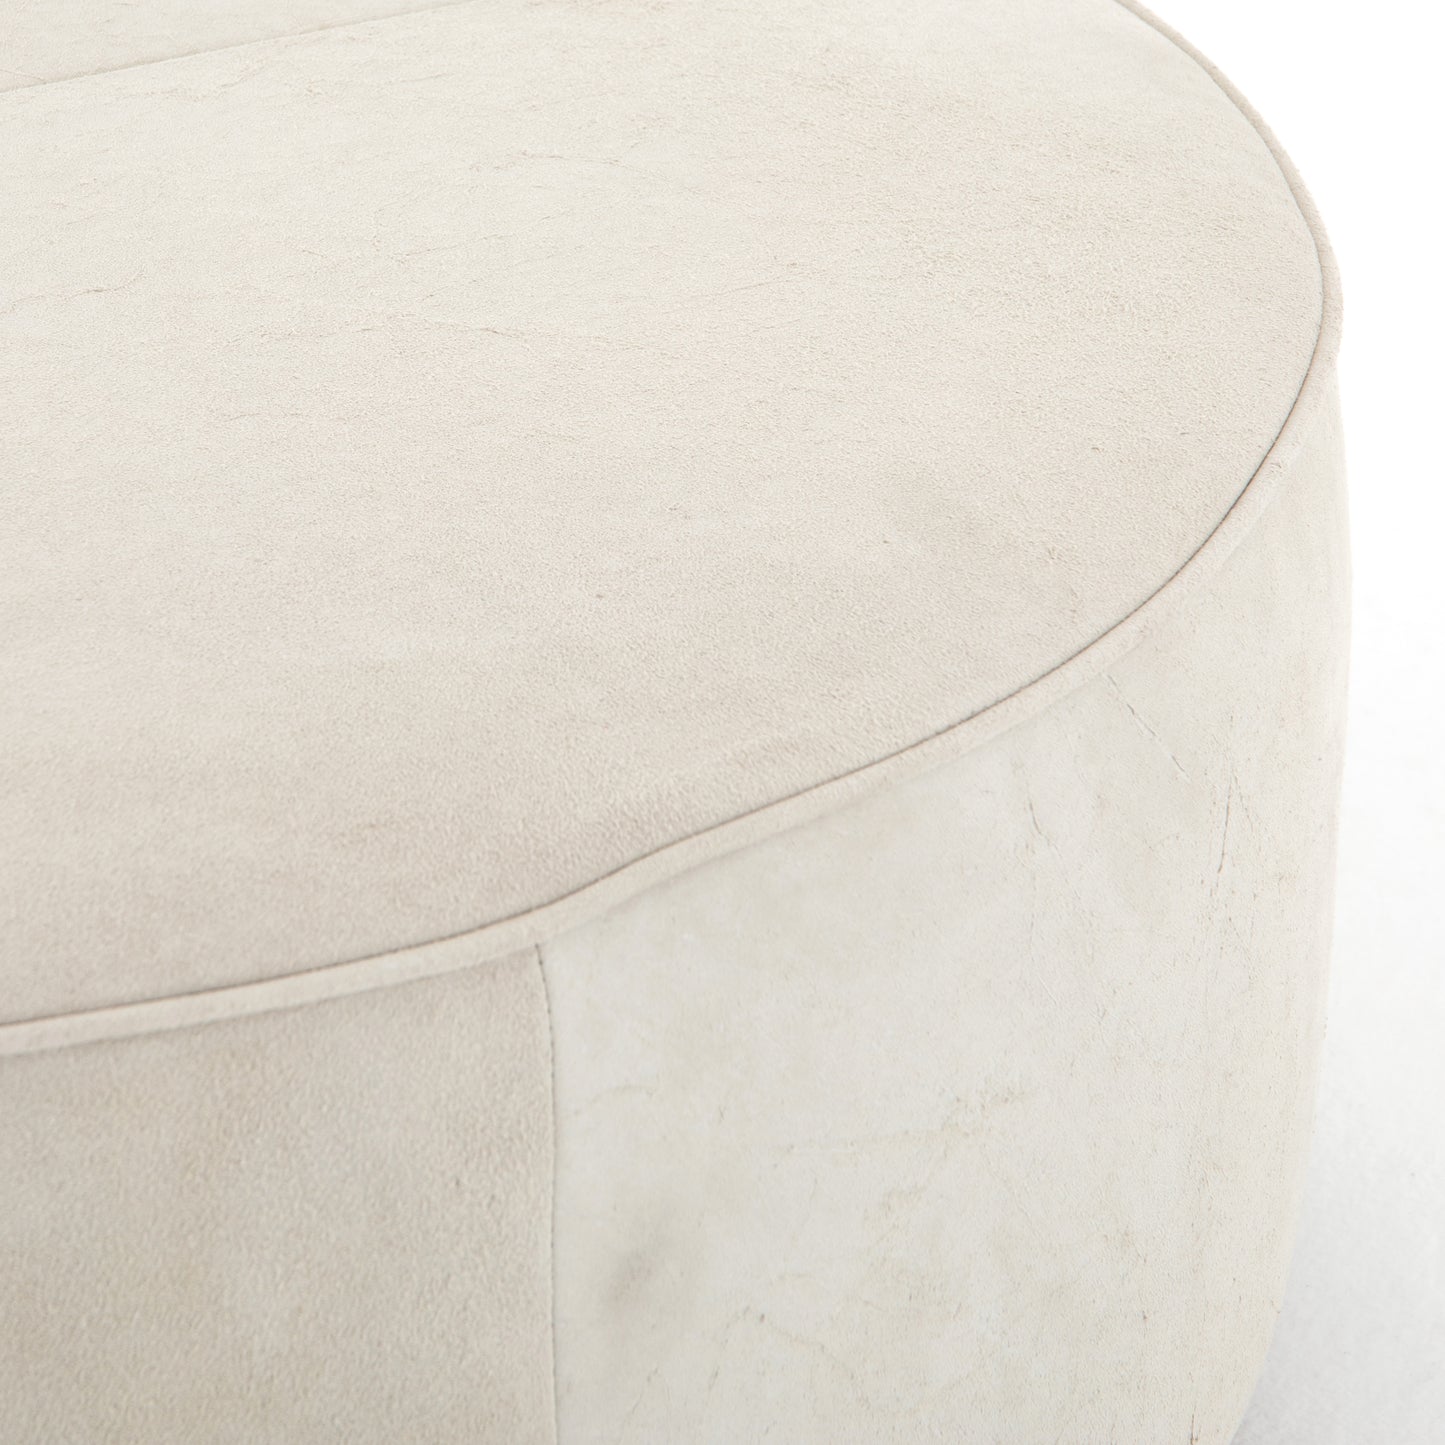 Sinclair Large Round Ottoman-Oyster